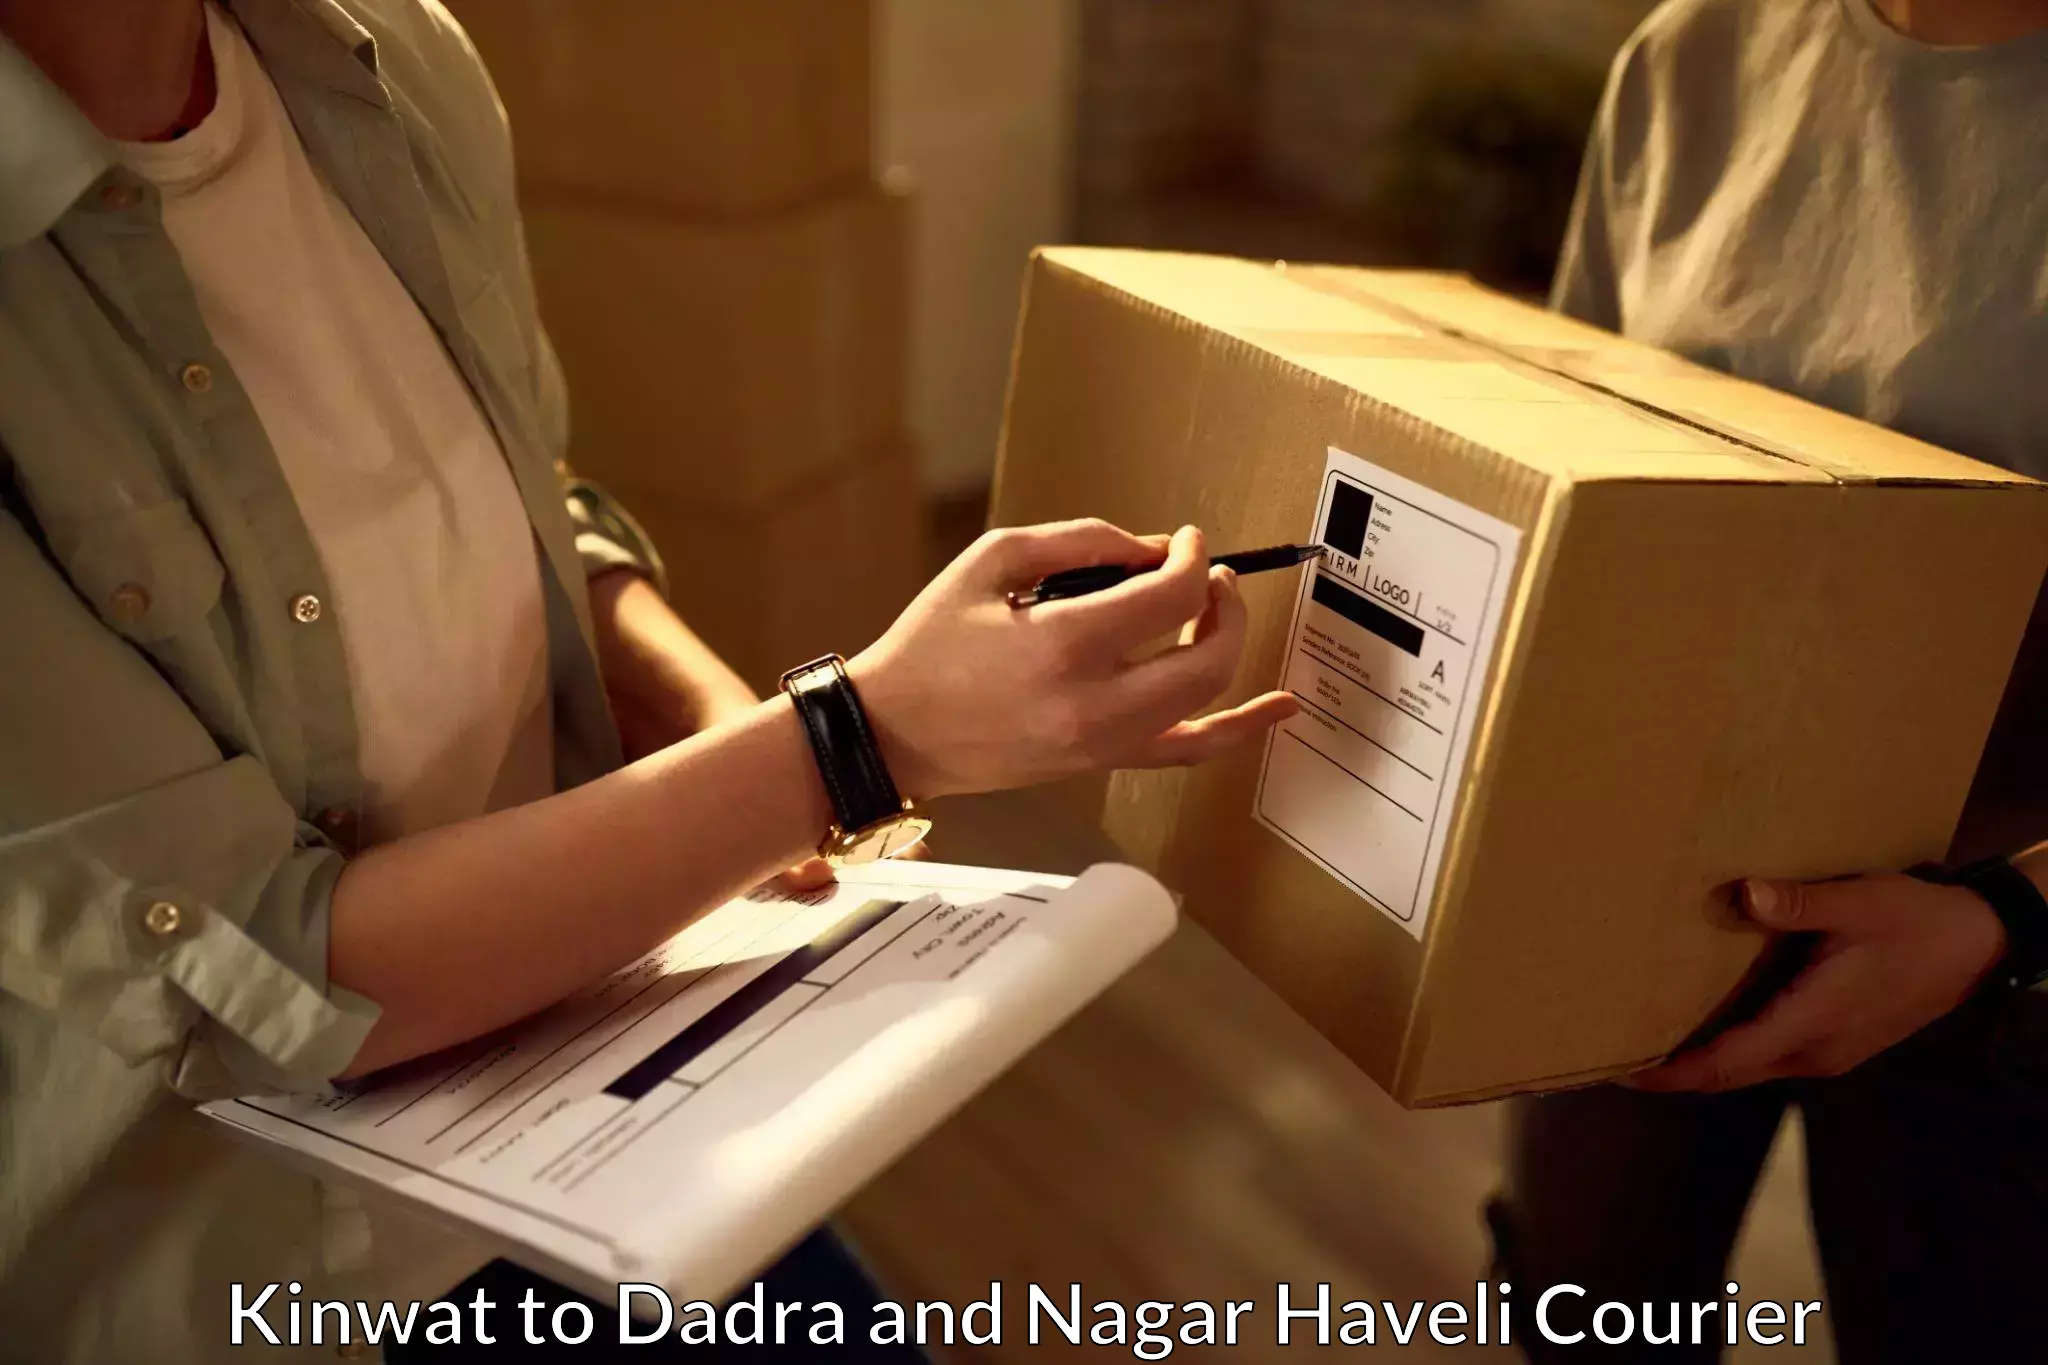 Express courier facilities in Kinwat to Dadra and Nagar Haveli